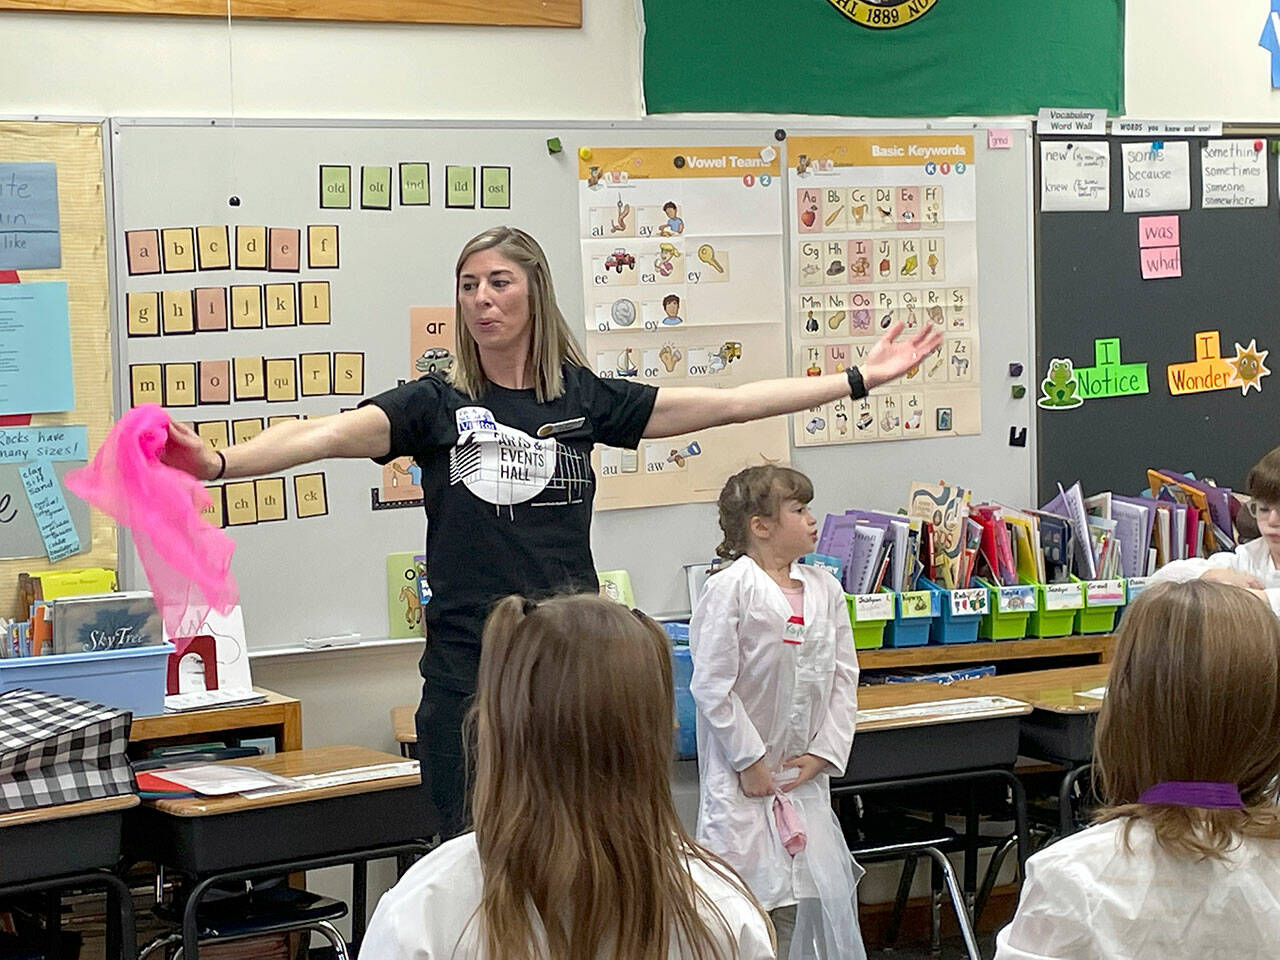 Dancer Keely Whitmore leads second graders in teacher Sharon Fritschler’s class at Roosevelt Elementary in exercises that integrate movement and a science lesson about geology as part of Peninsula Performs, a collaboration between Field Arts & Events Hall and the Port Angeles School District that brings artist educators into classrooms. (Paula Hunt/Peninsula Daily News)